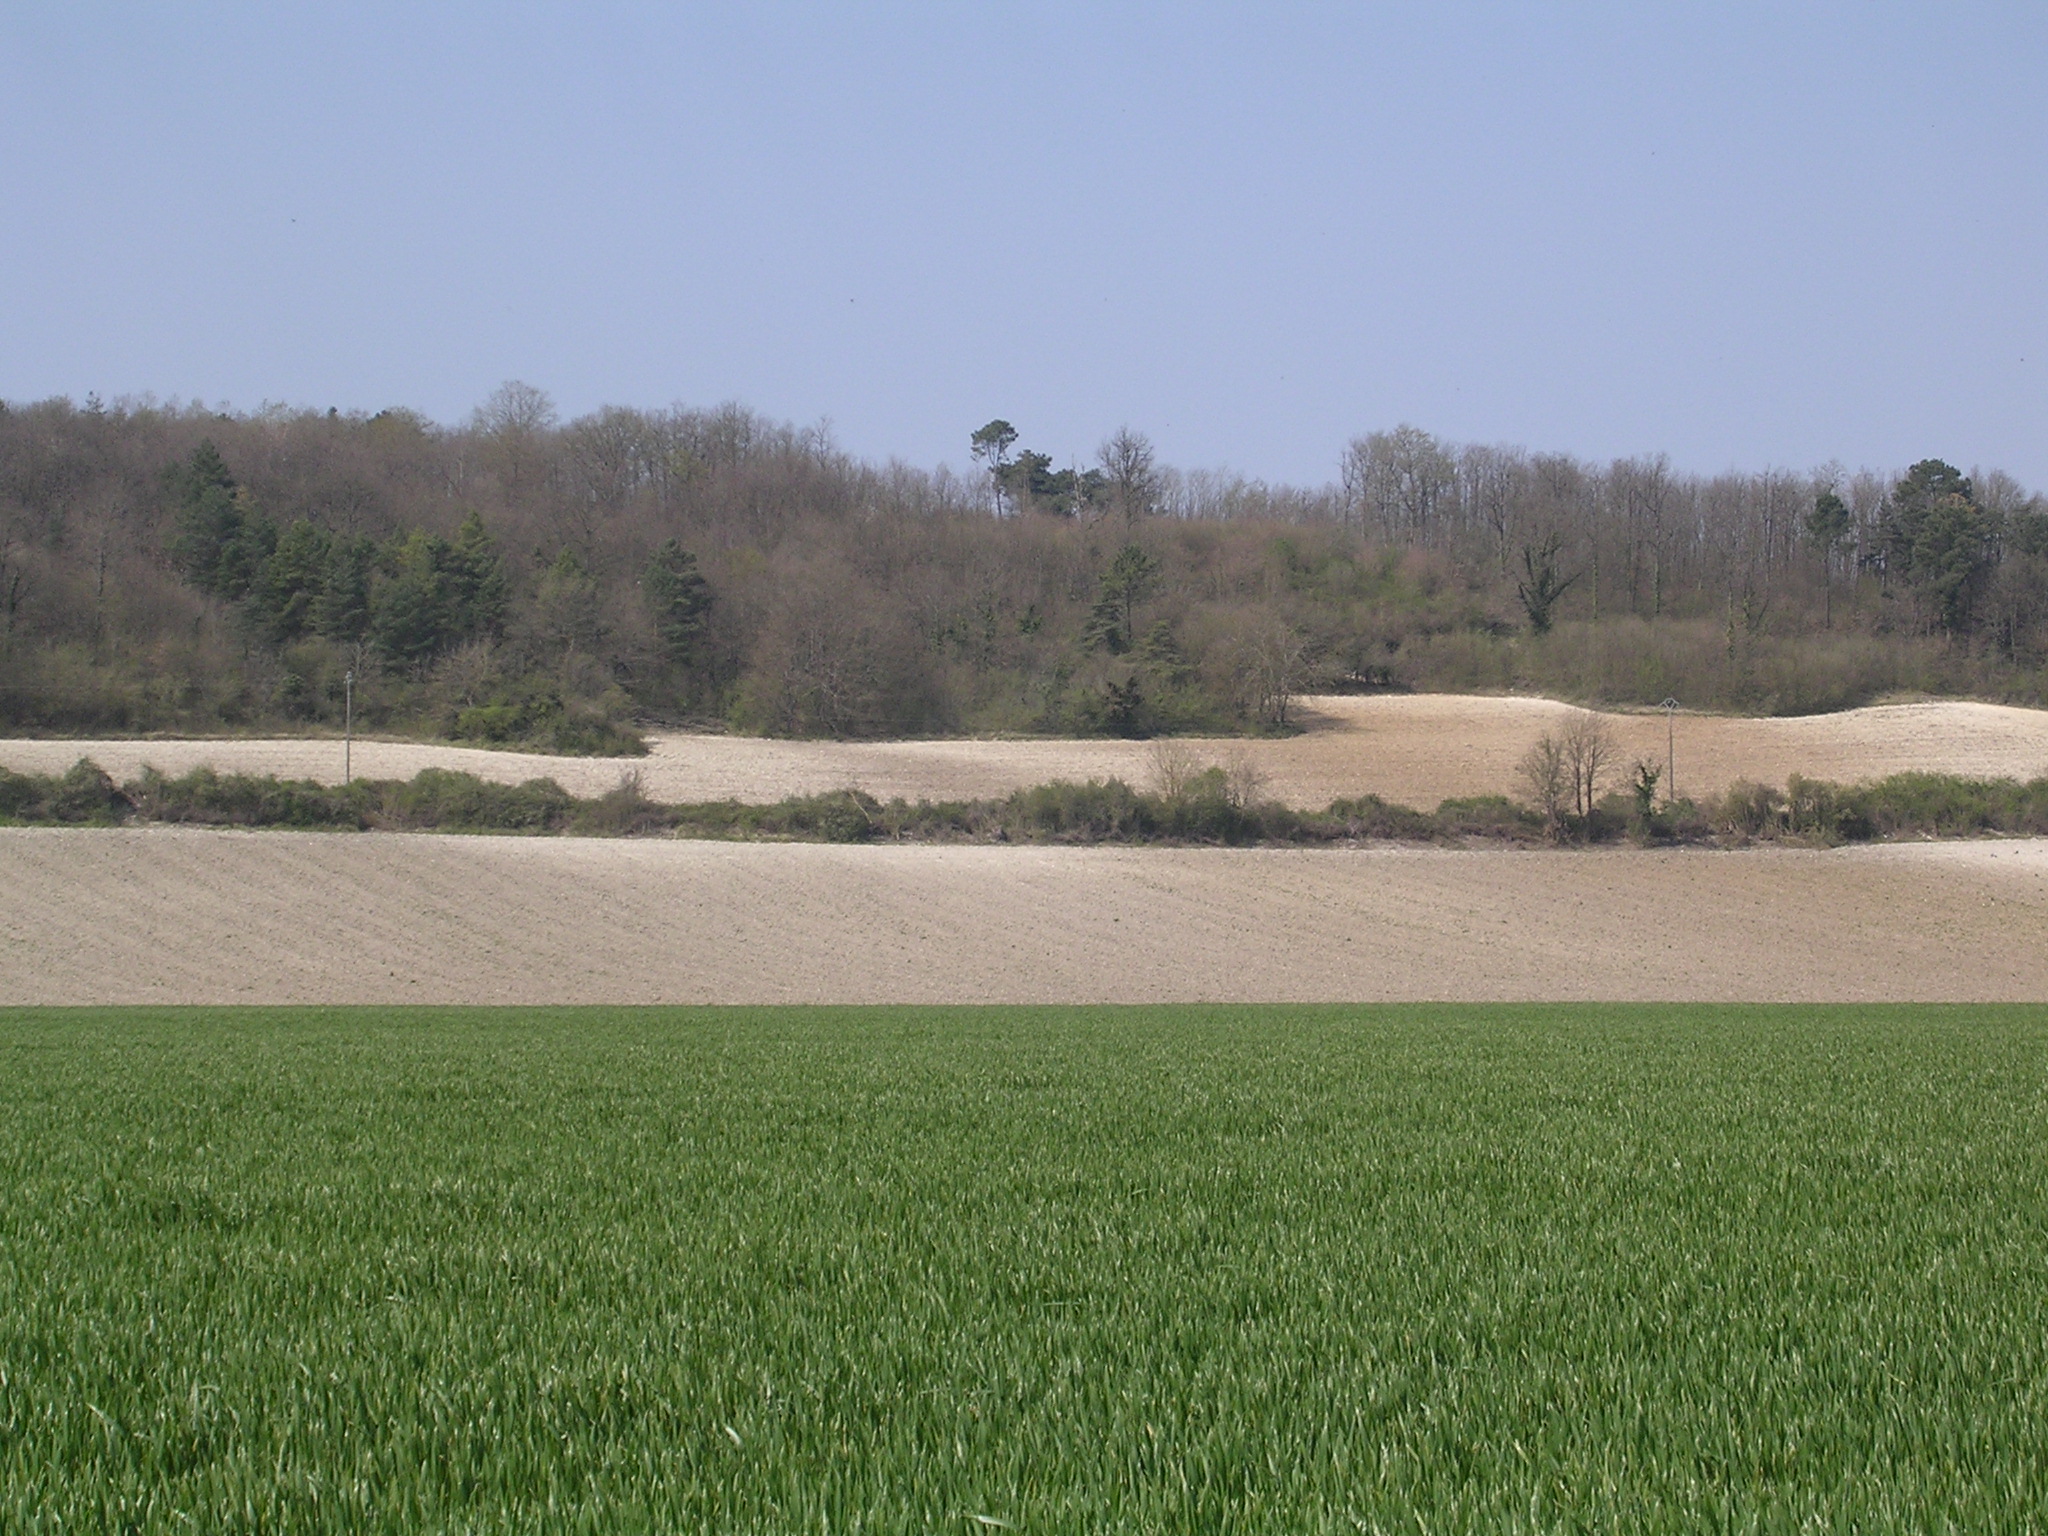 an empty field in the middle of a large open area